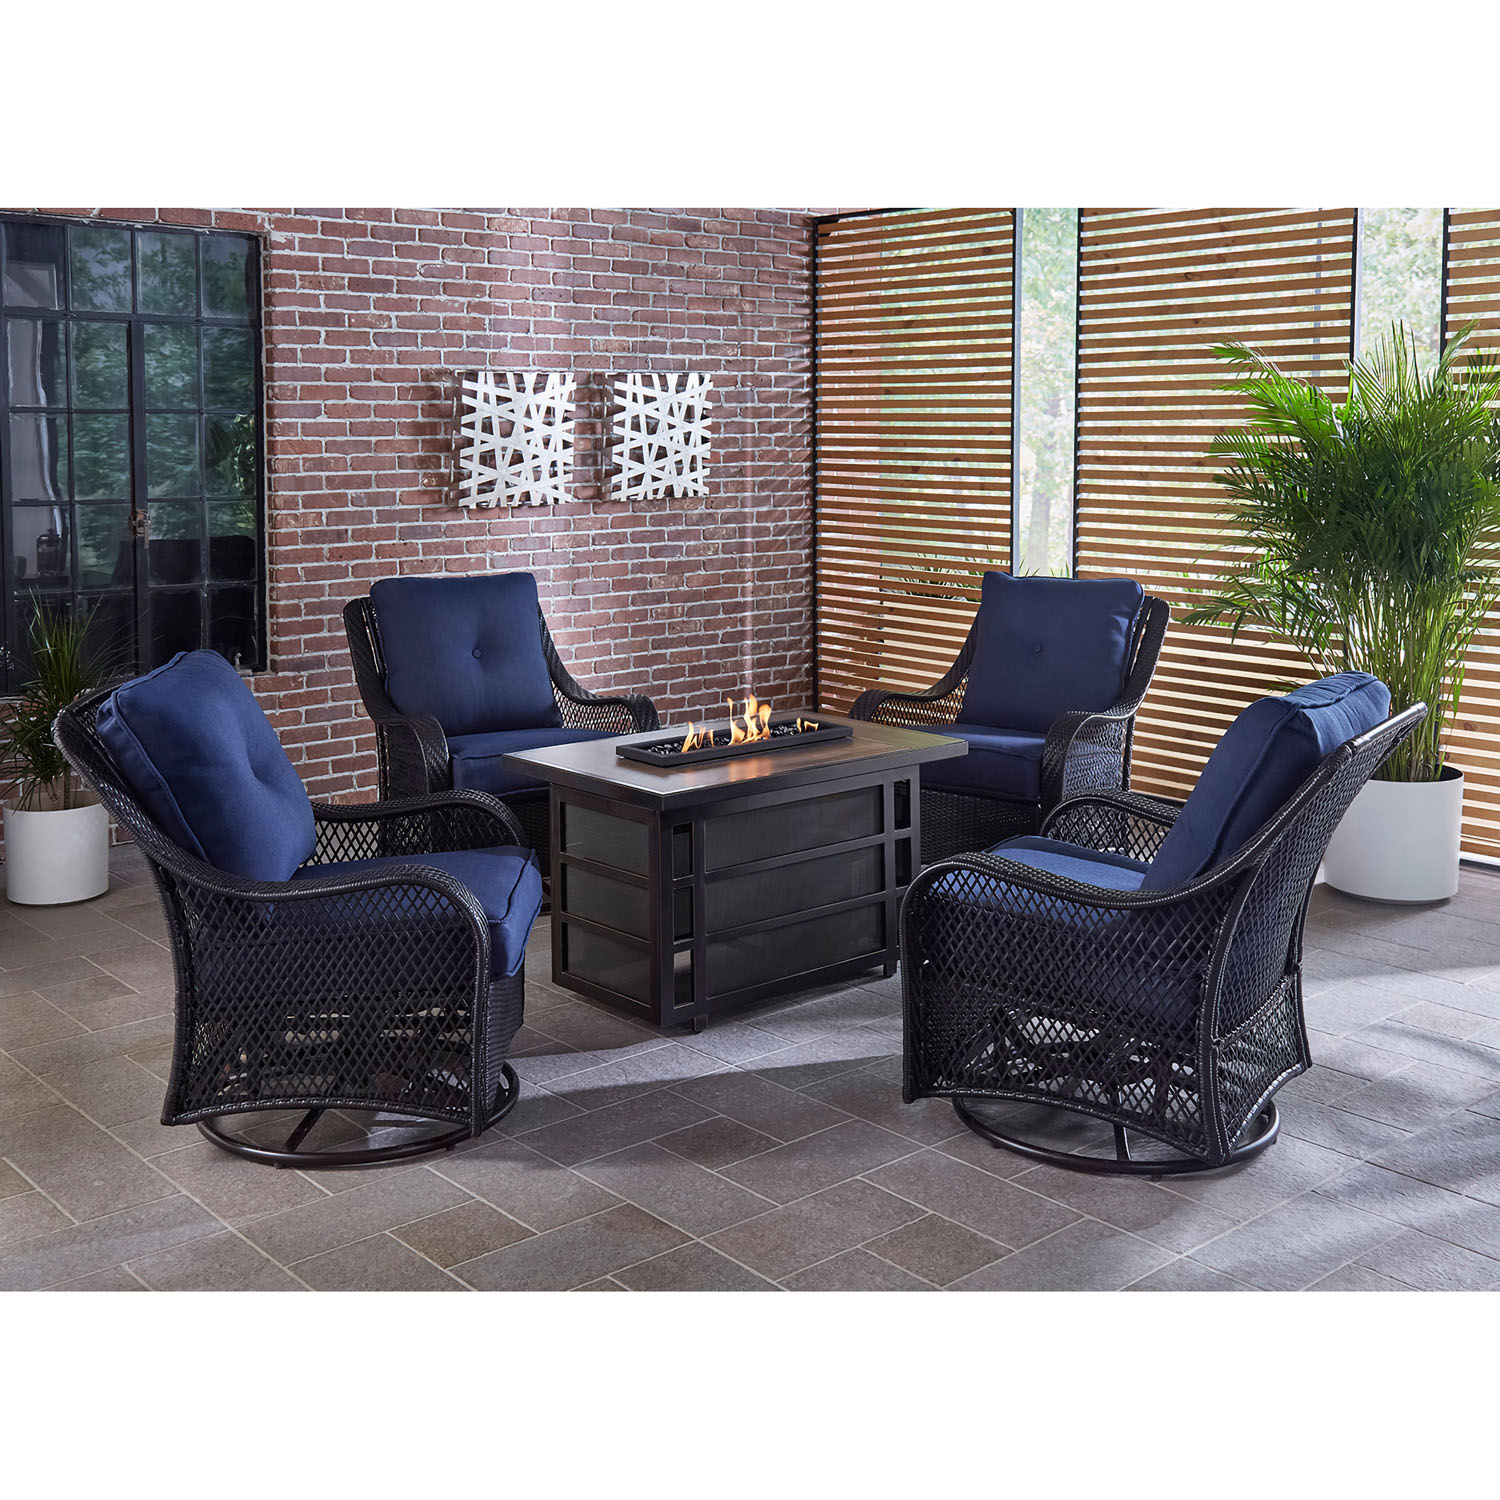 Hanover Orleans 5 Pcs Wicker and Steel Propane Fire Pit Chat Set, Navy Blue - image 2 of 10